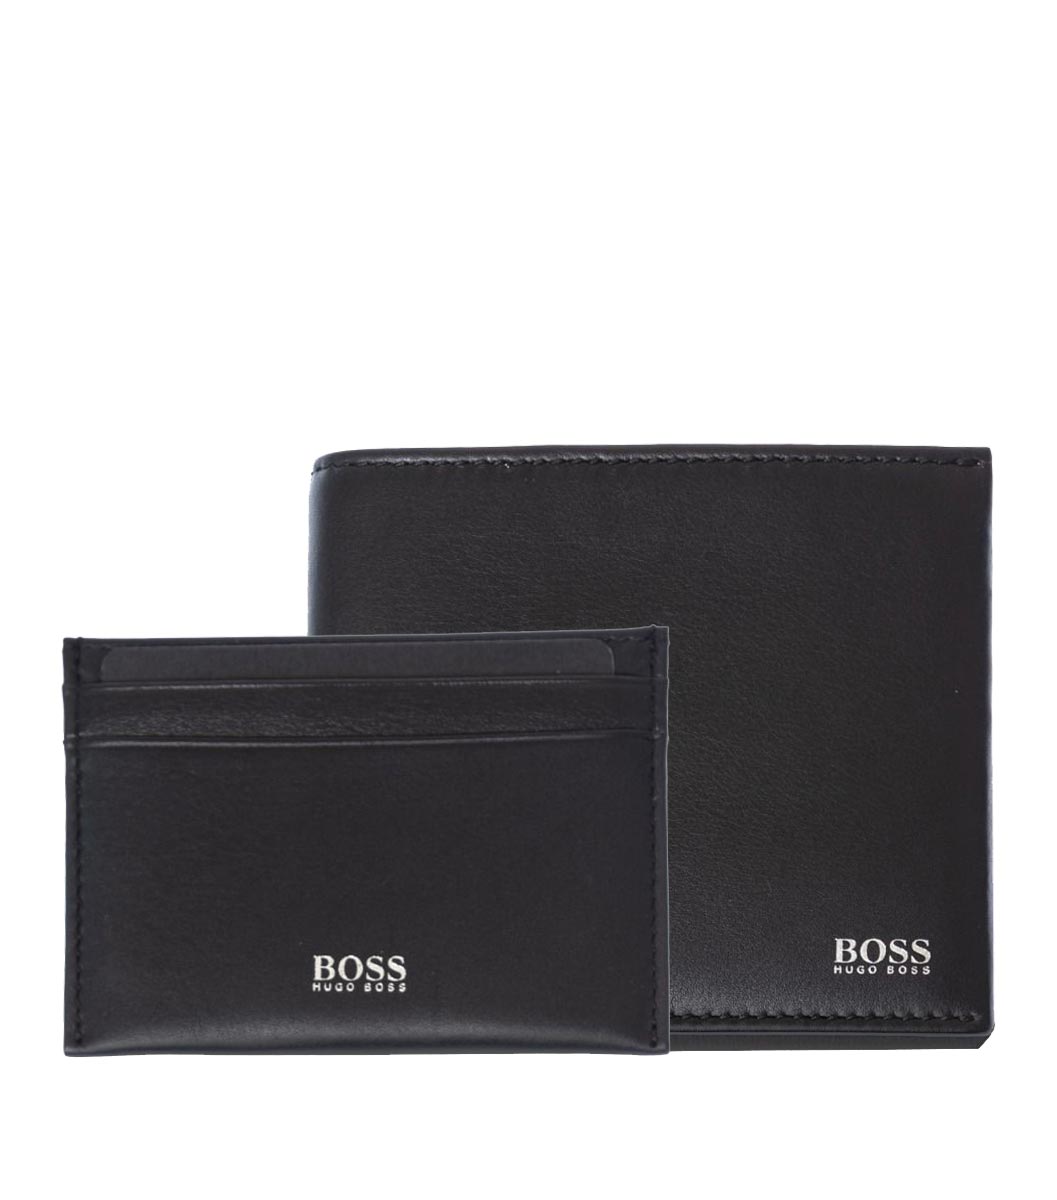 BOSS GBBM_8 cc S C Card Holder and Wallet in Black